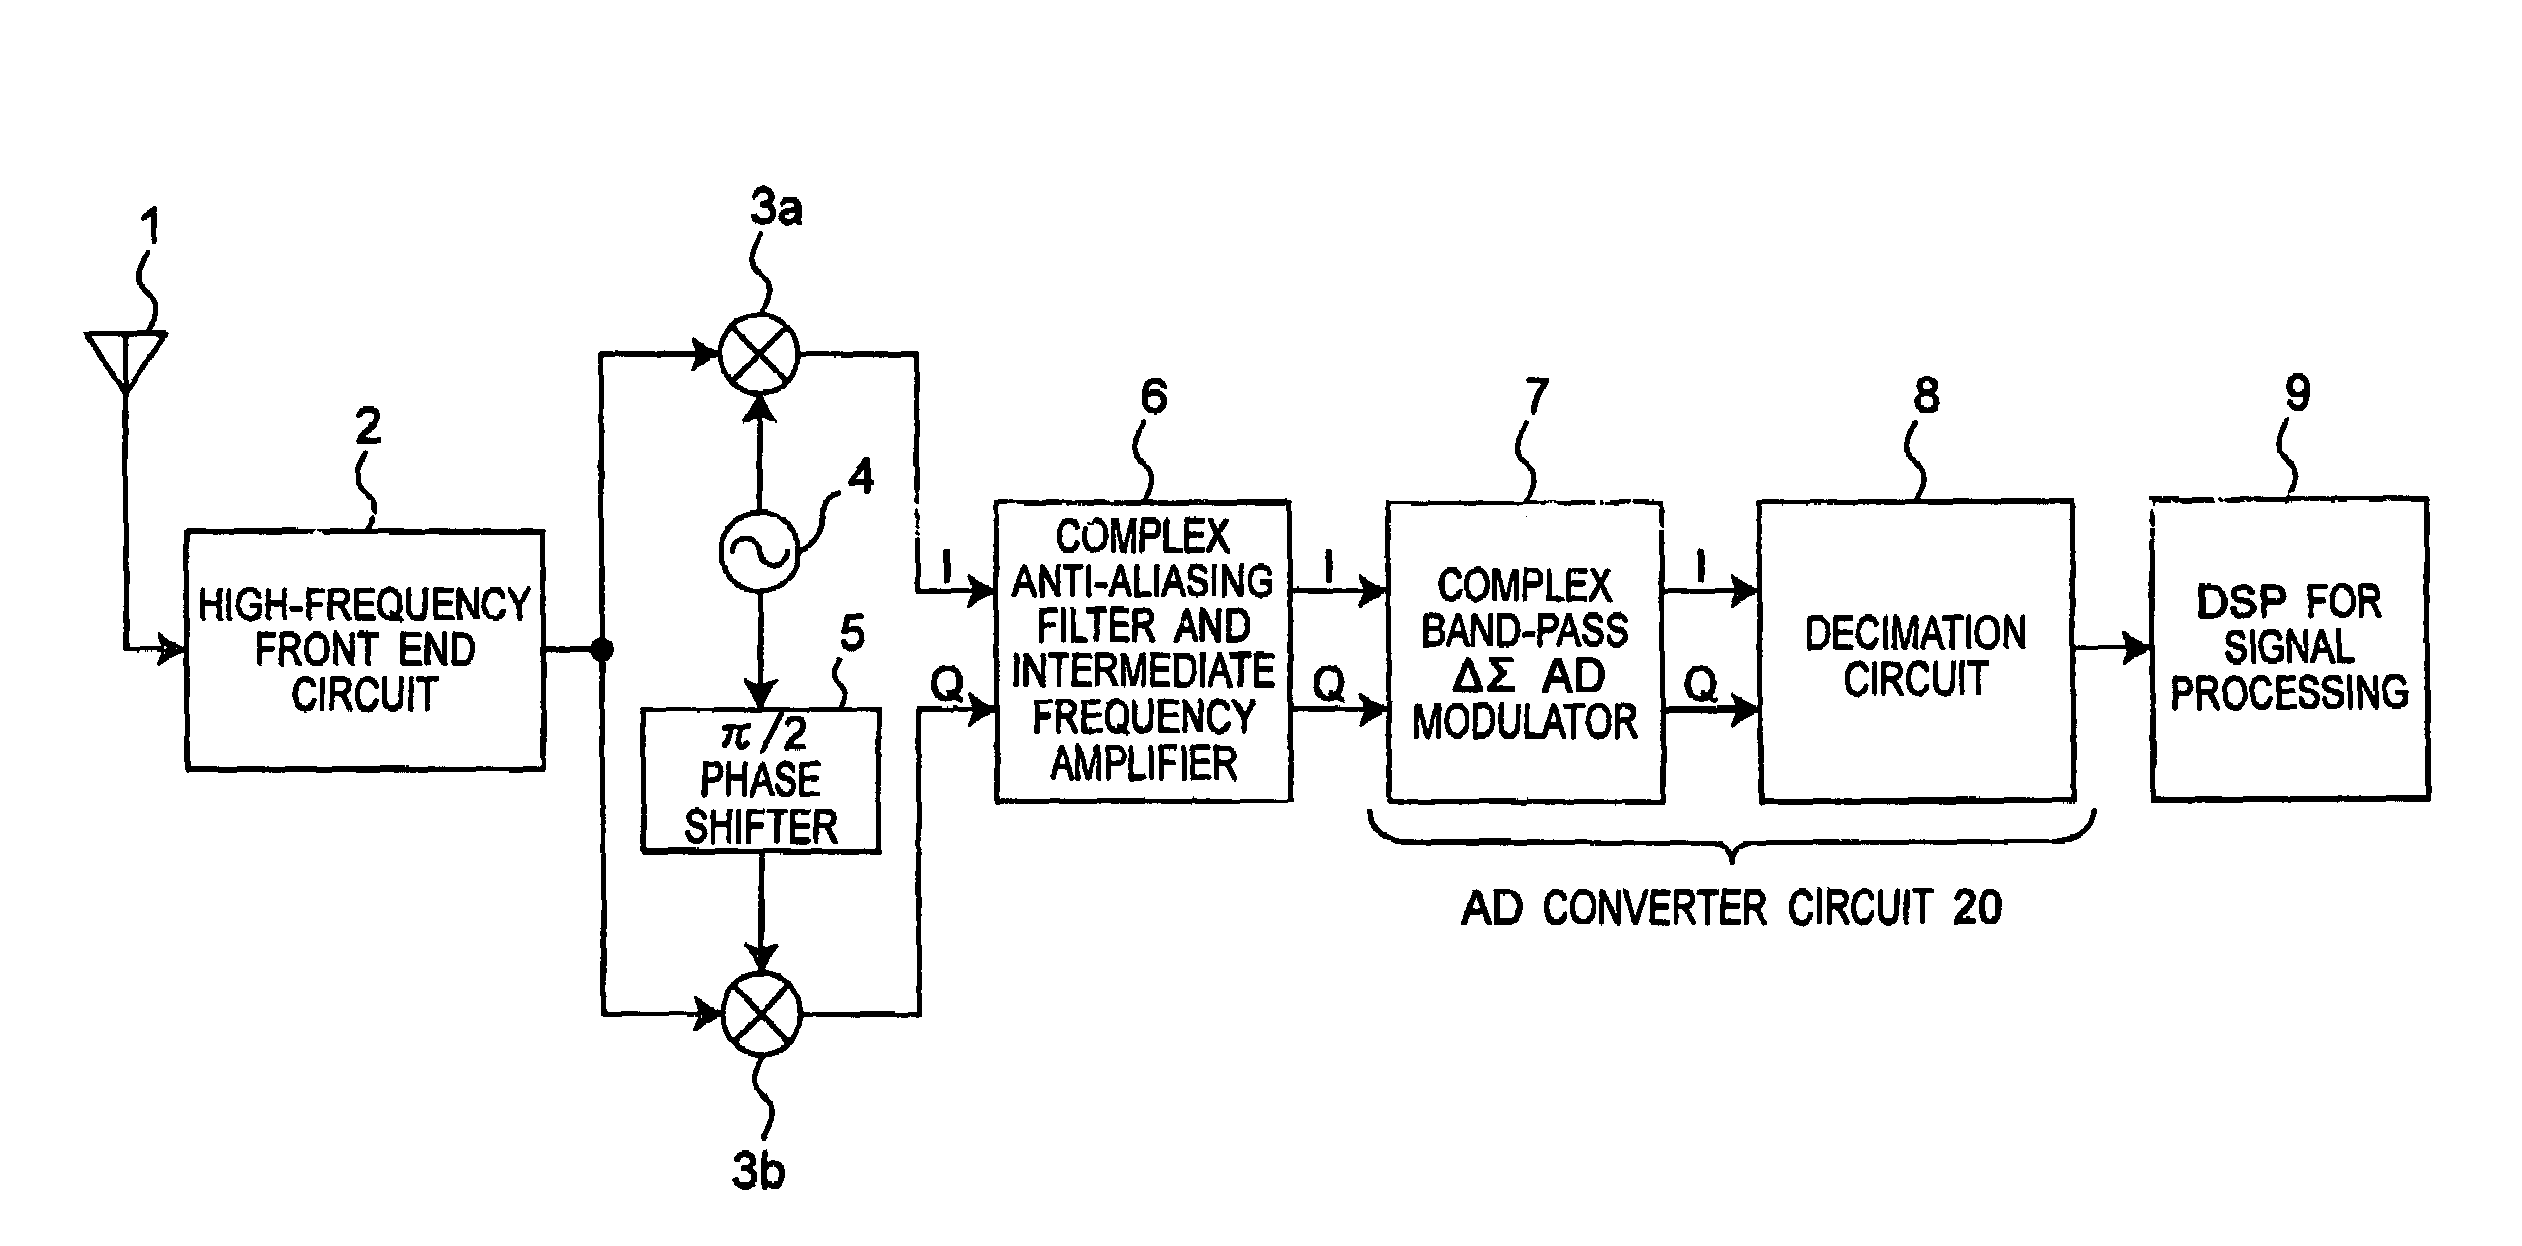 Complex band-pass DeltaSigma AD modulator for use in AD converter circuit